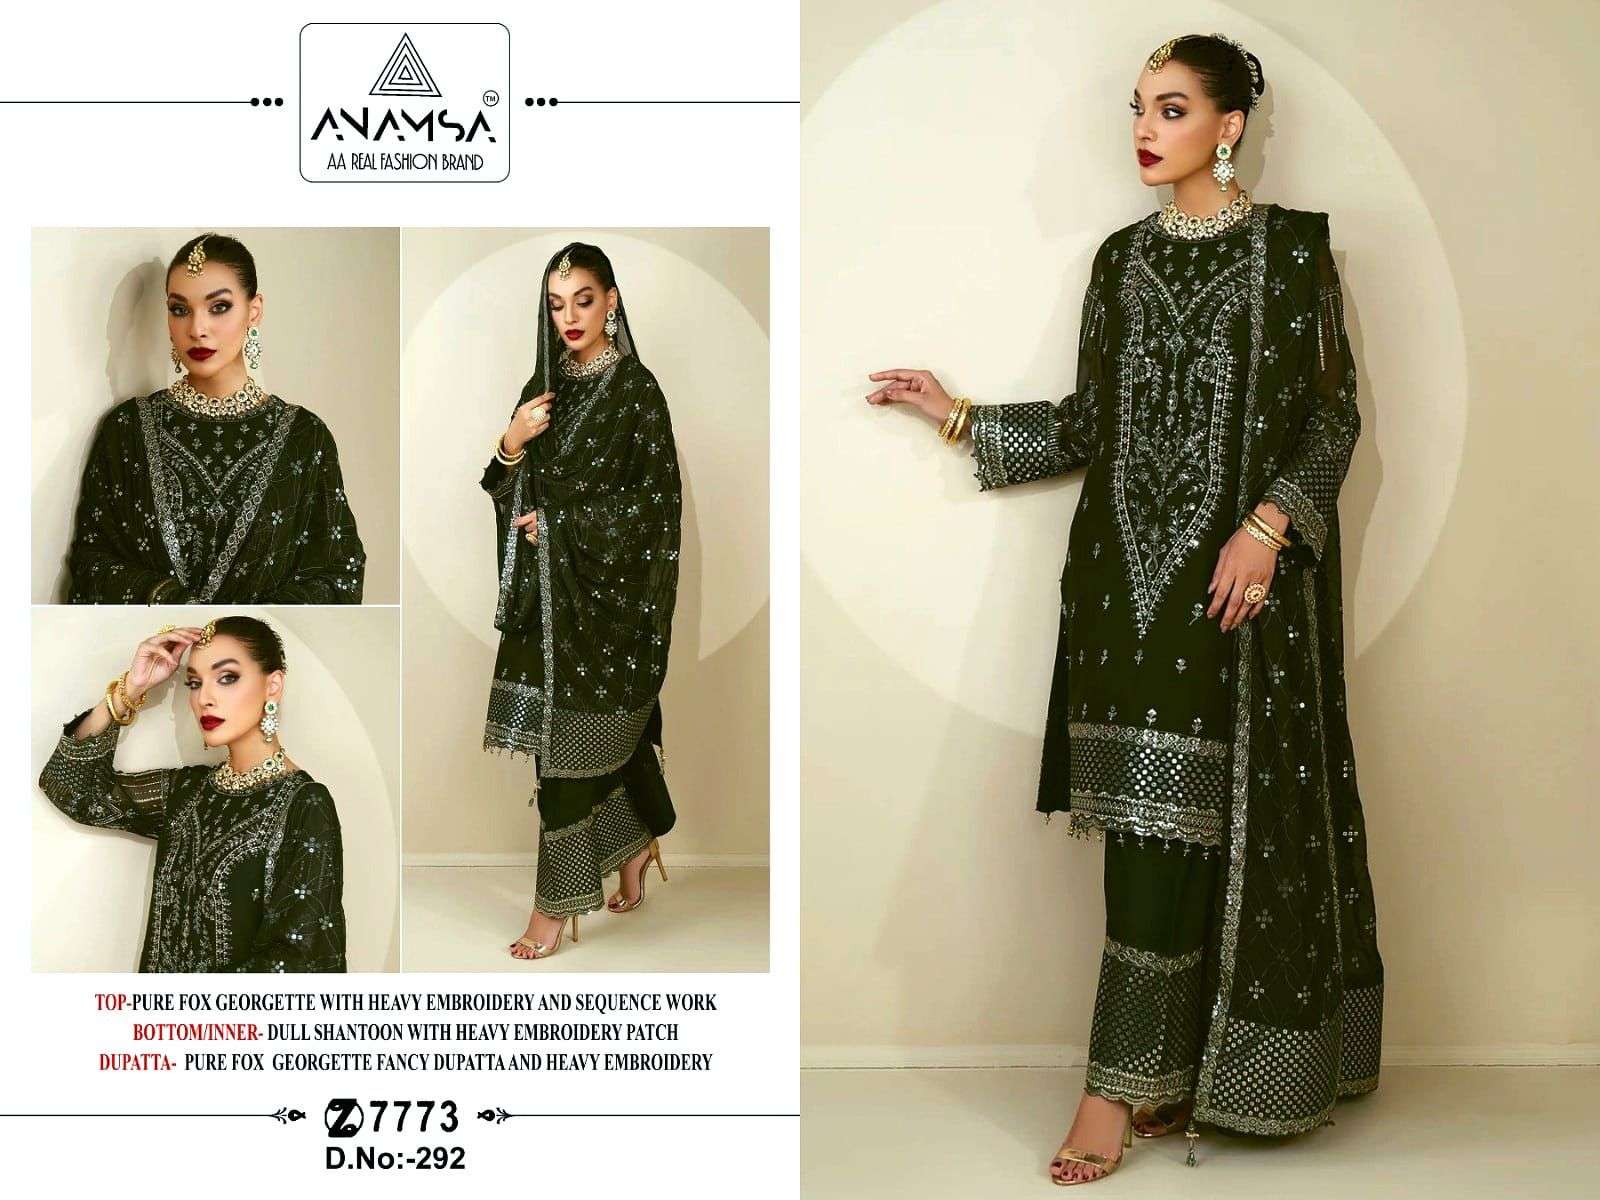 ANAMSA 292 GEORGETTE WITH EMBROIDERY WORK GREEN COLOUR PAKISTANI SUITS COLLECTION AT BEST RATE